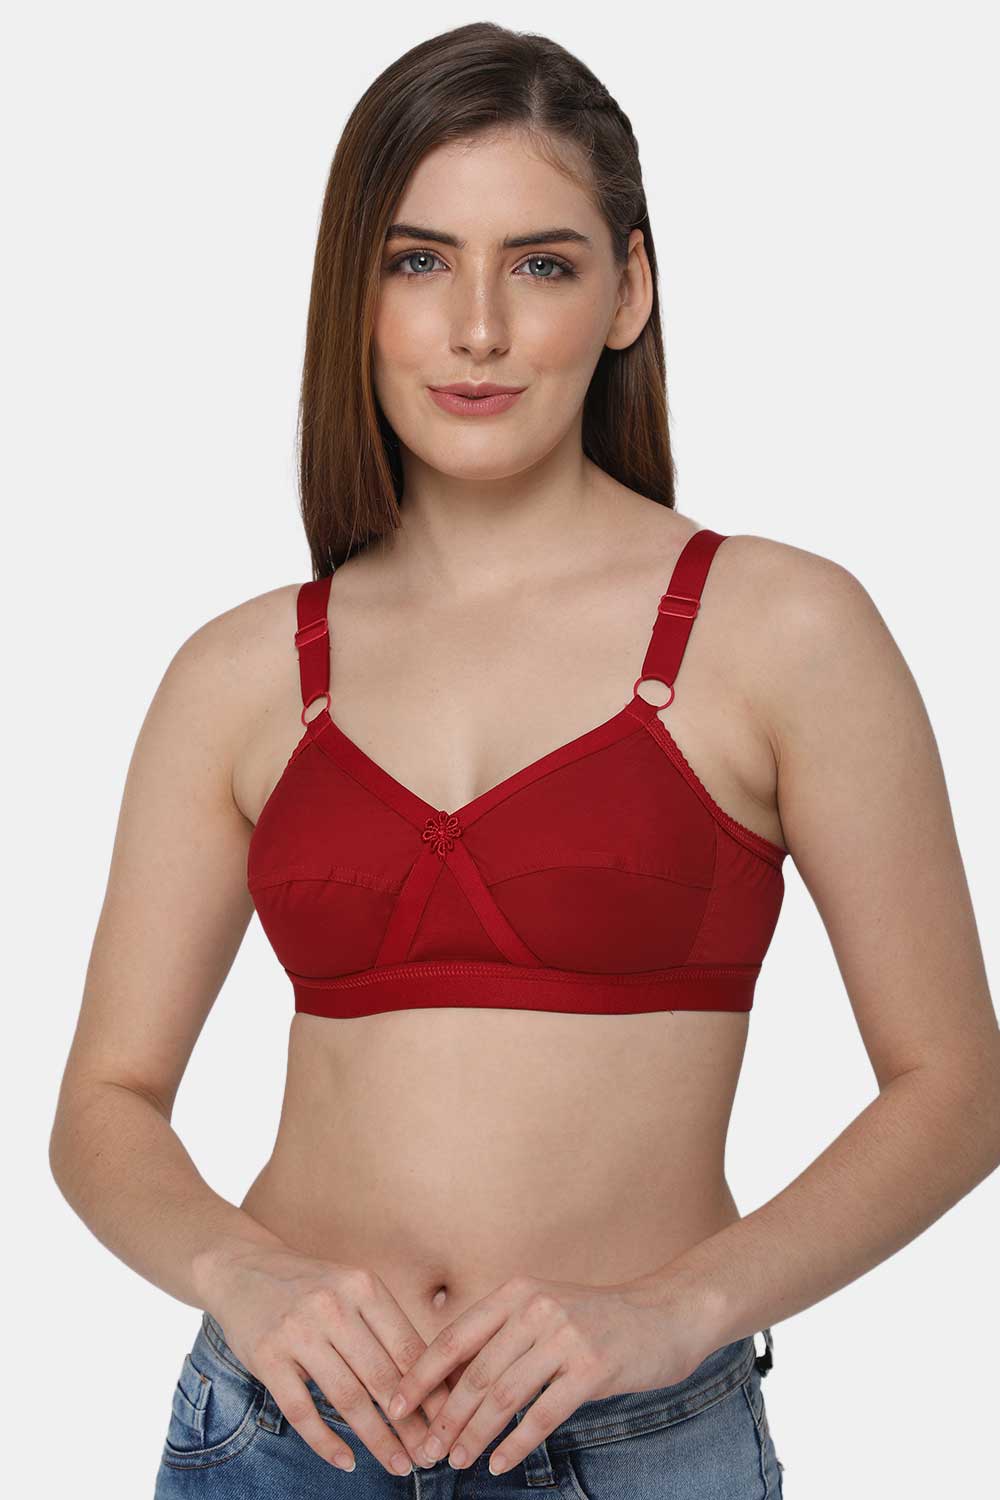 Light Pink Nandini Ladies Cotton Padded Bra, Size: 30 - 40 at Rs